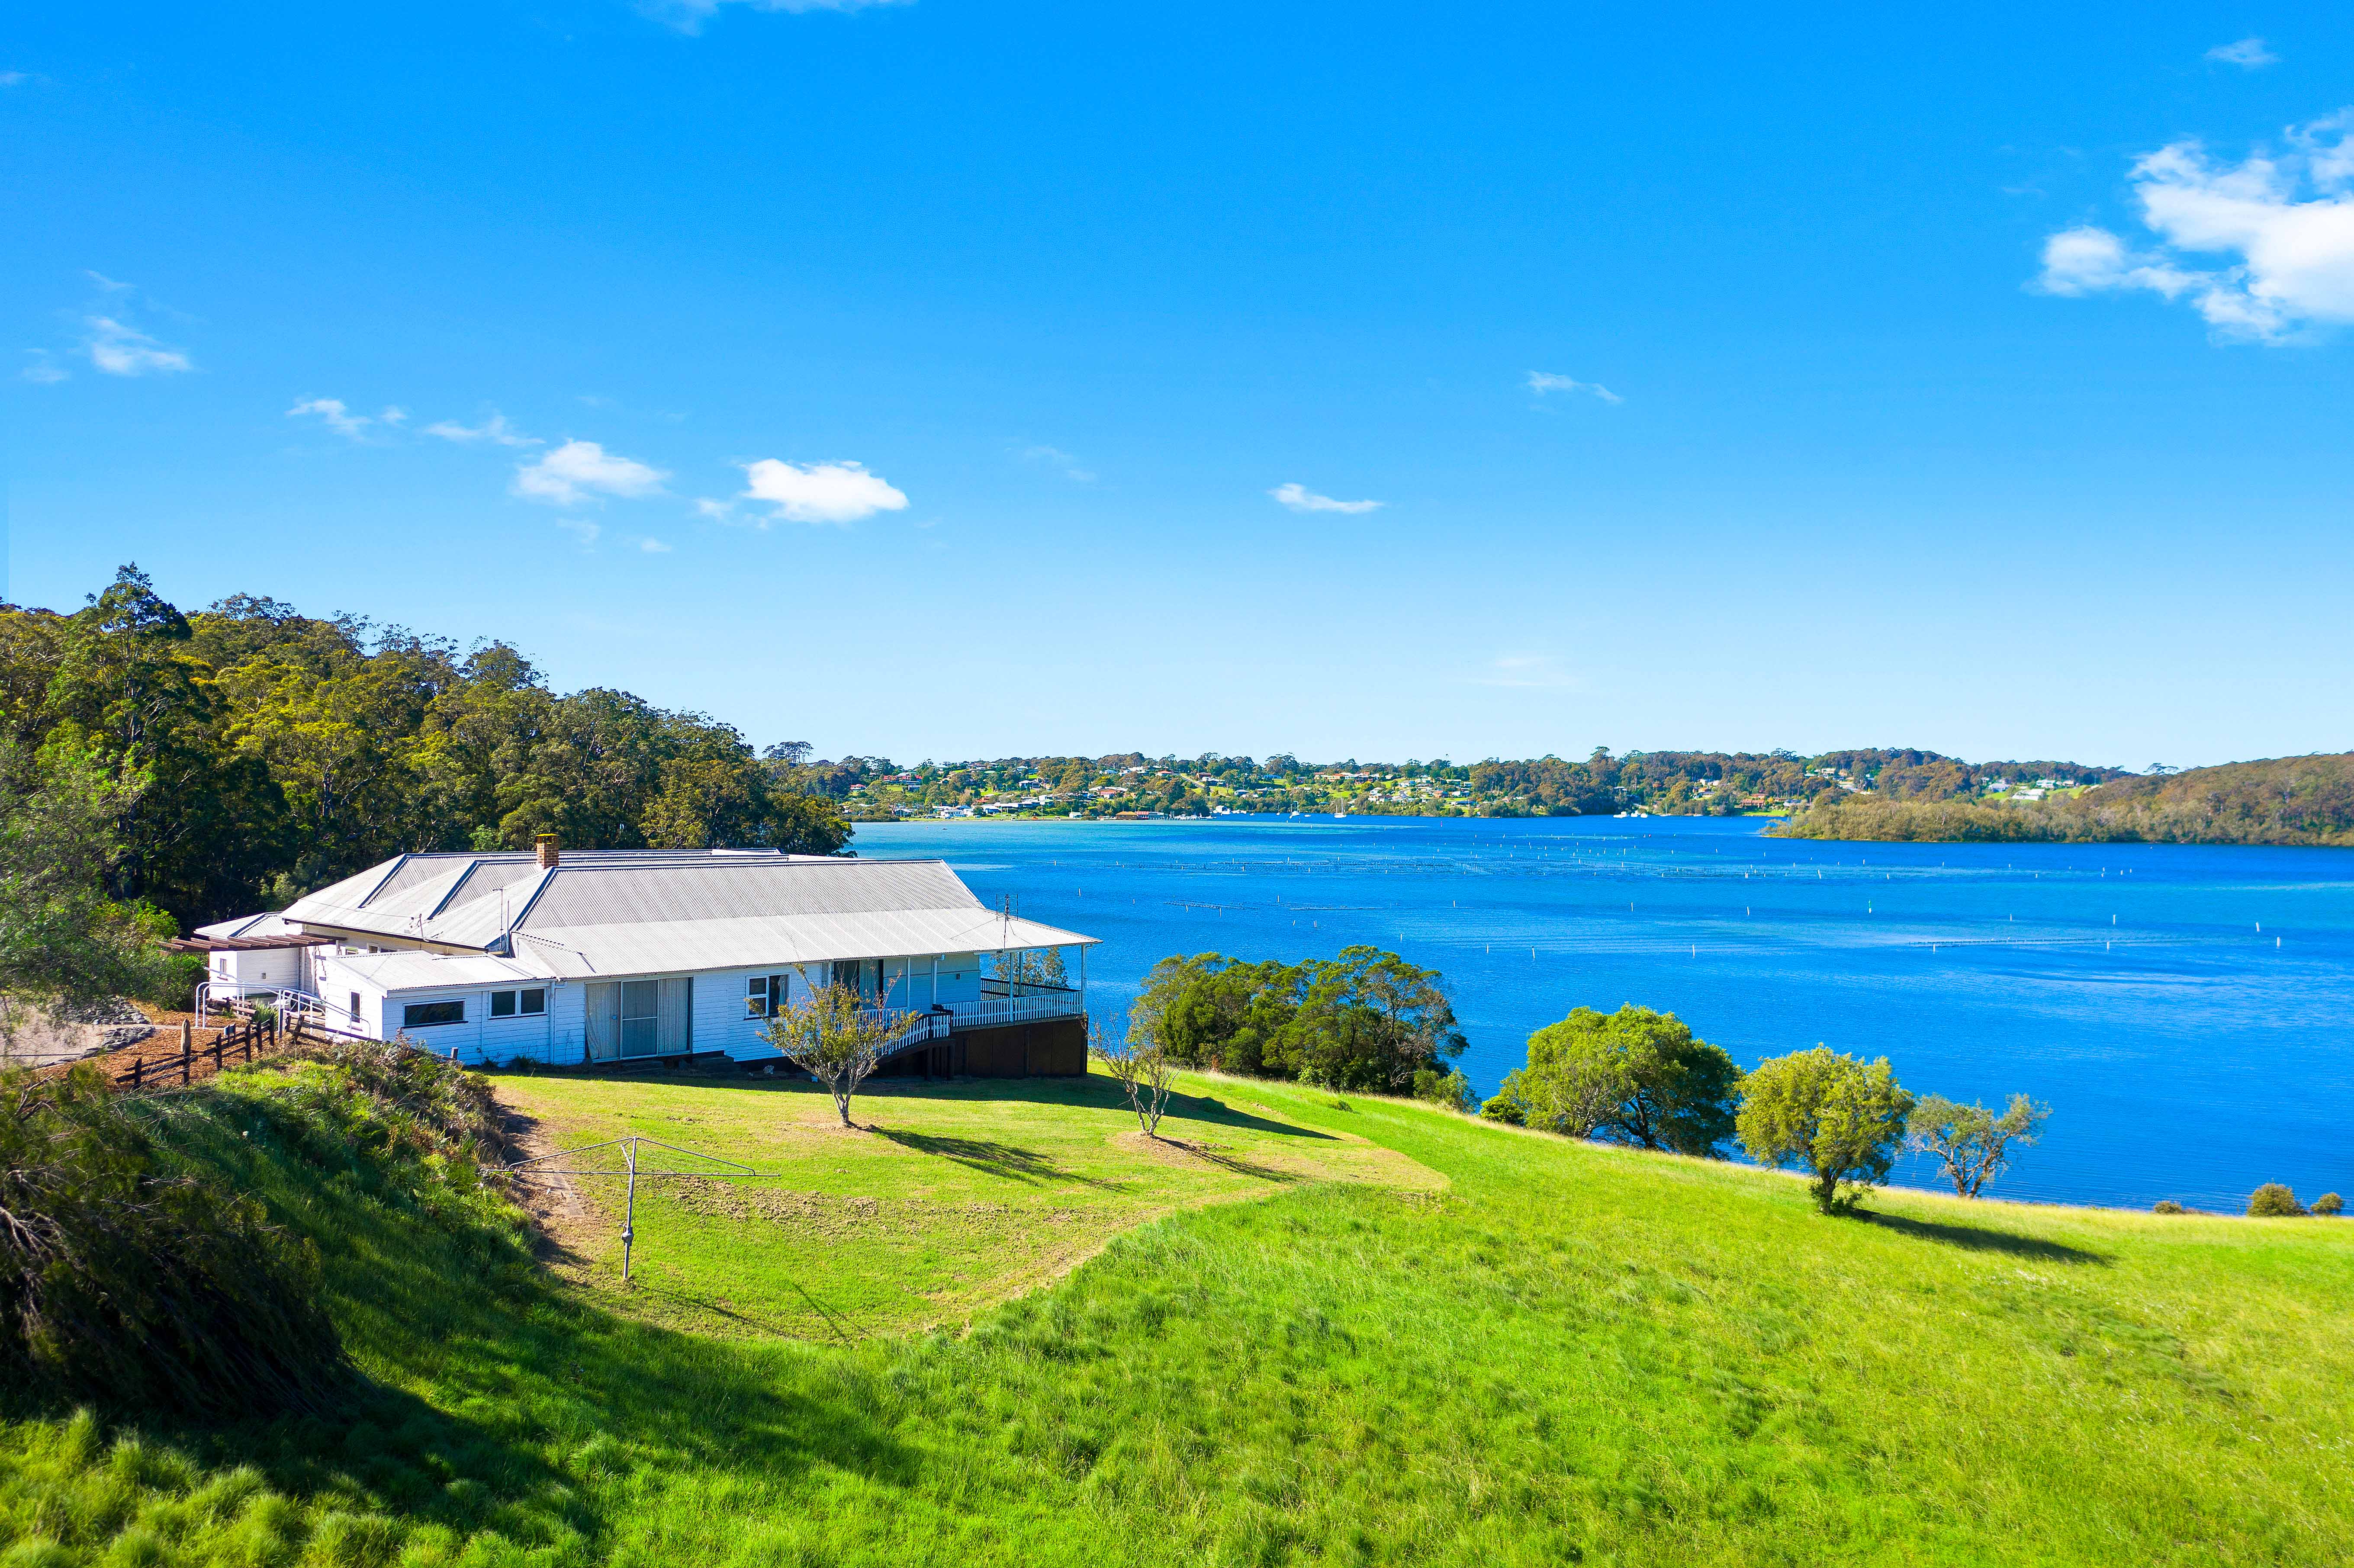 Blackwood Park on the pristine waters of Wagonga Inlet offers boundless opportunity